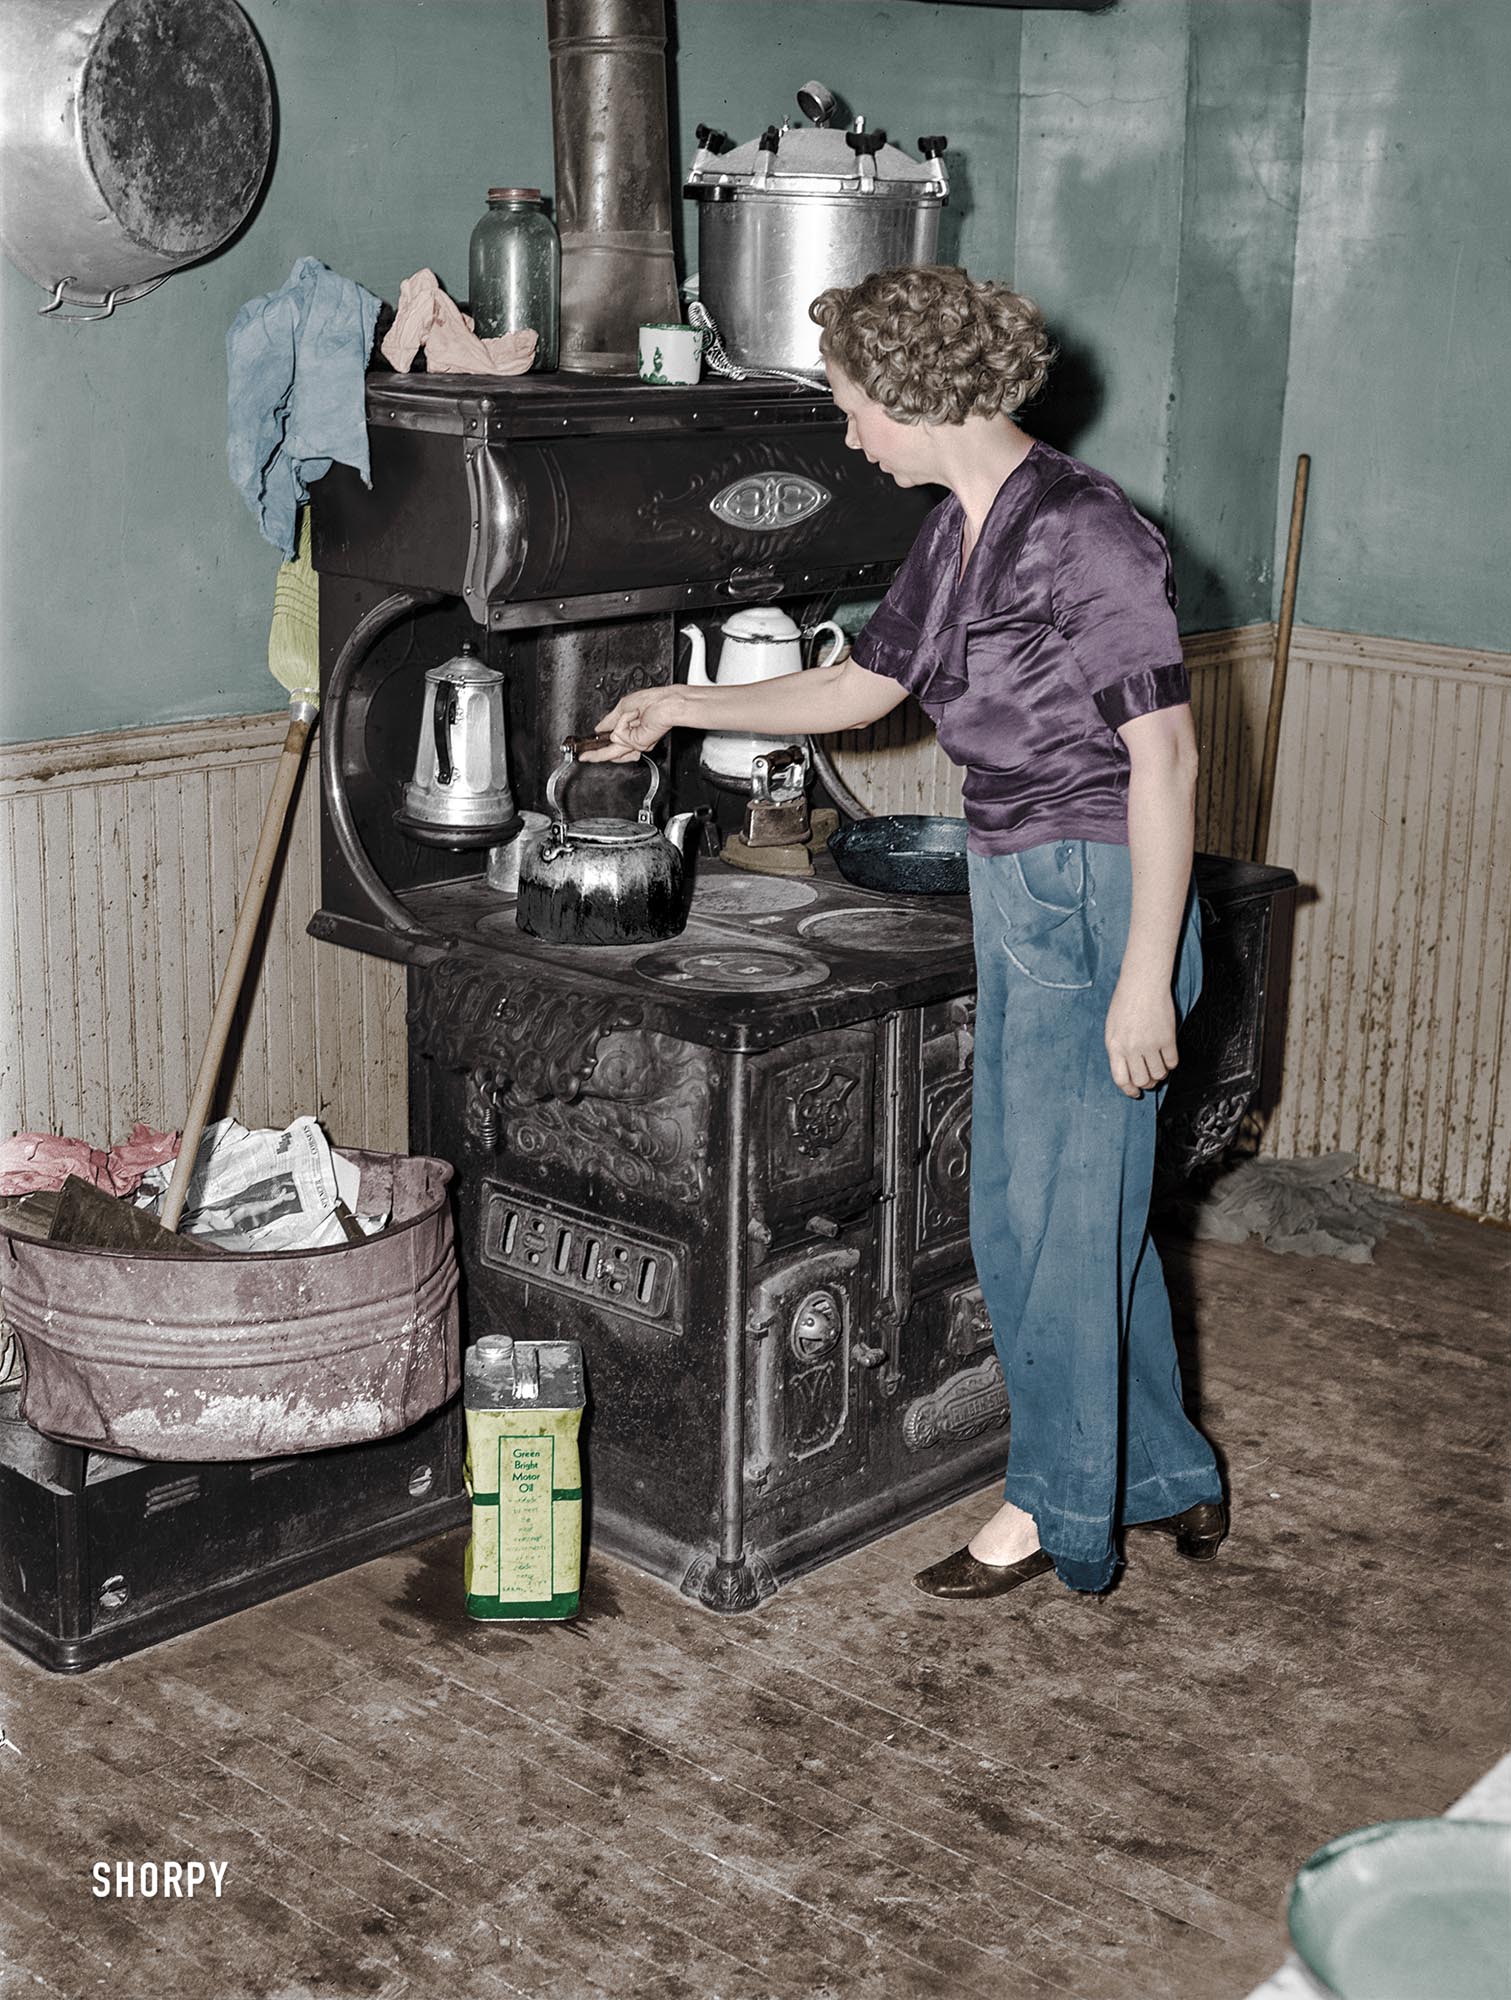 Here is my colorized version of this Shorpy Photo. This is a fire hazard. Check out the gallon oil can next to the stove, loose newspapers in the wash tub and rags on top of the stove.